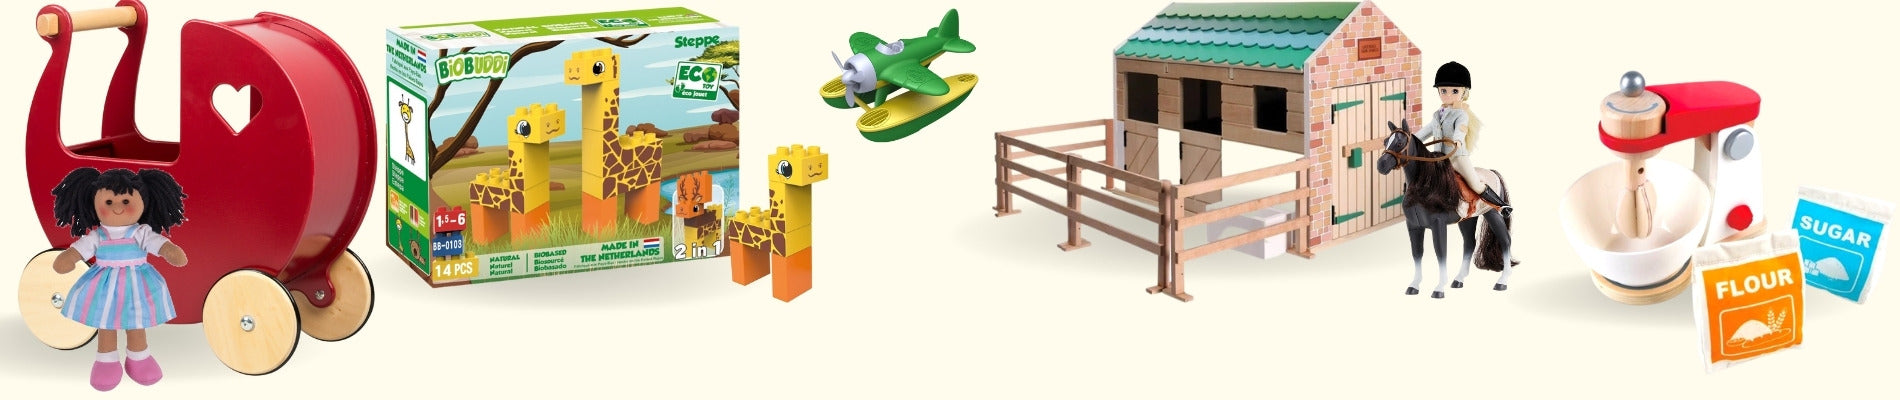 A selection of children's toys including (from l-r) a red pram and doll, giraffe building bricks, play stabels and horse and a wooden toy kitchen mixer.